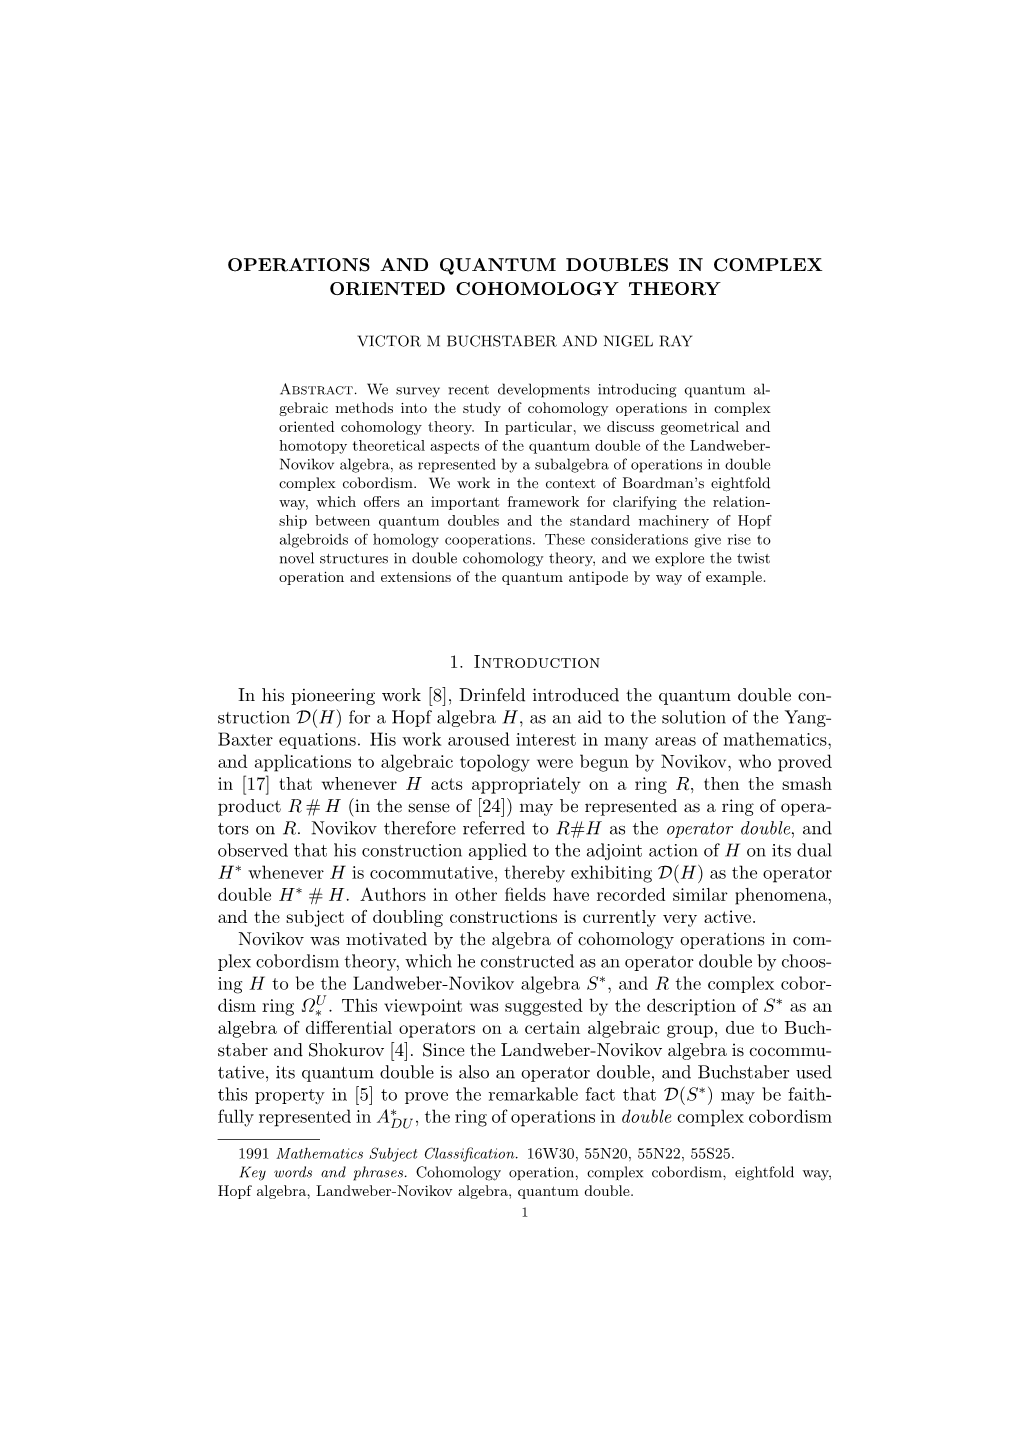 Operations and Quantum Doubles in Complex Oriented Cohomology Theory